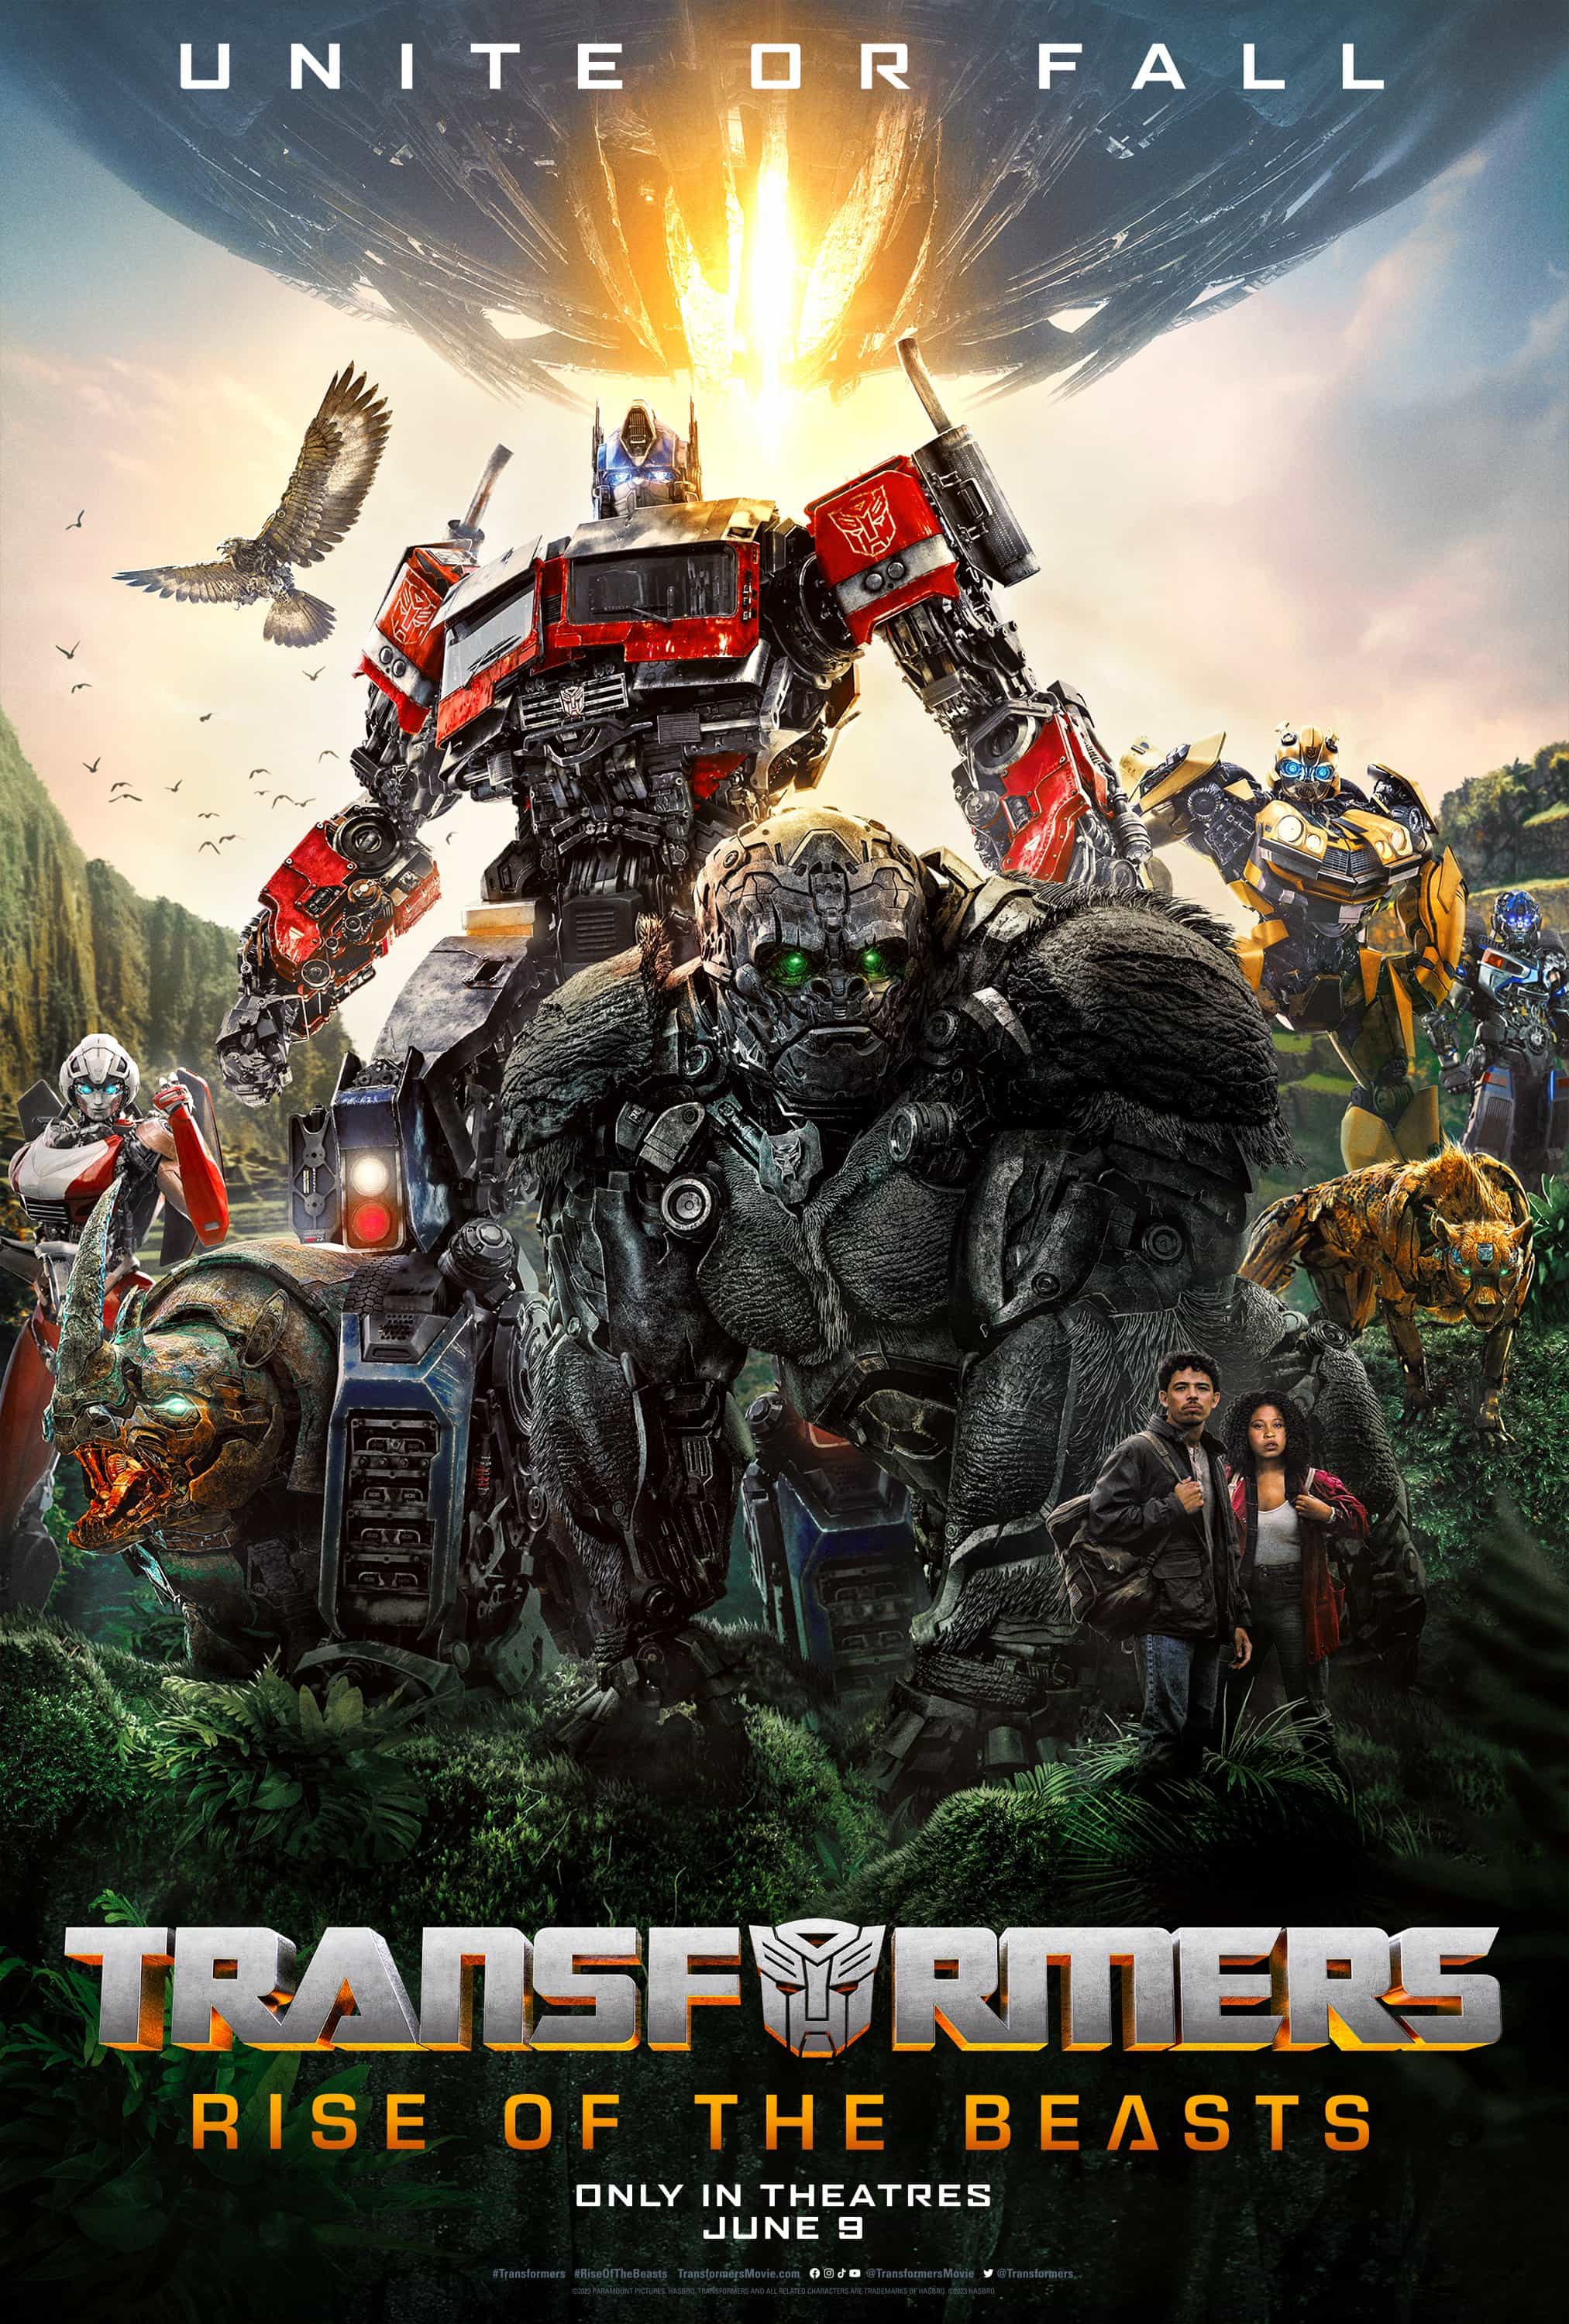 Transformers: Rise Of The Beasts is given a 12A age rating for moderate action violence, threat, language